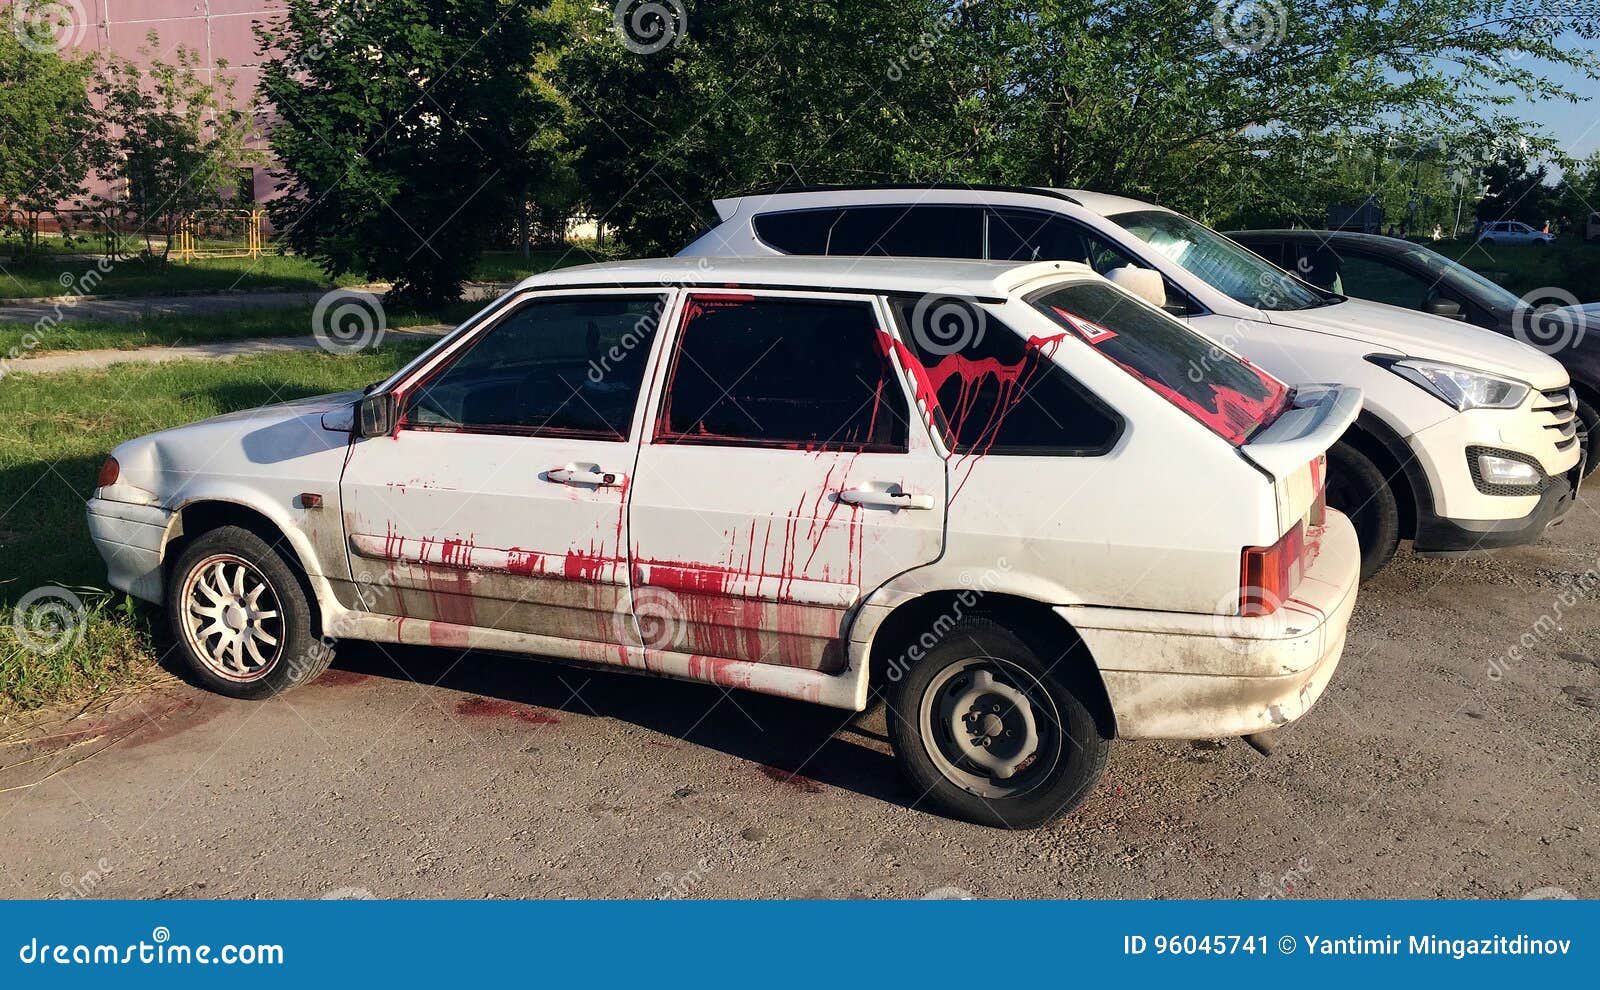 vandalism - a modern car, doused with paint in free parking